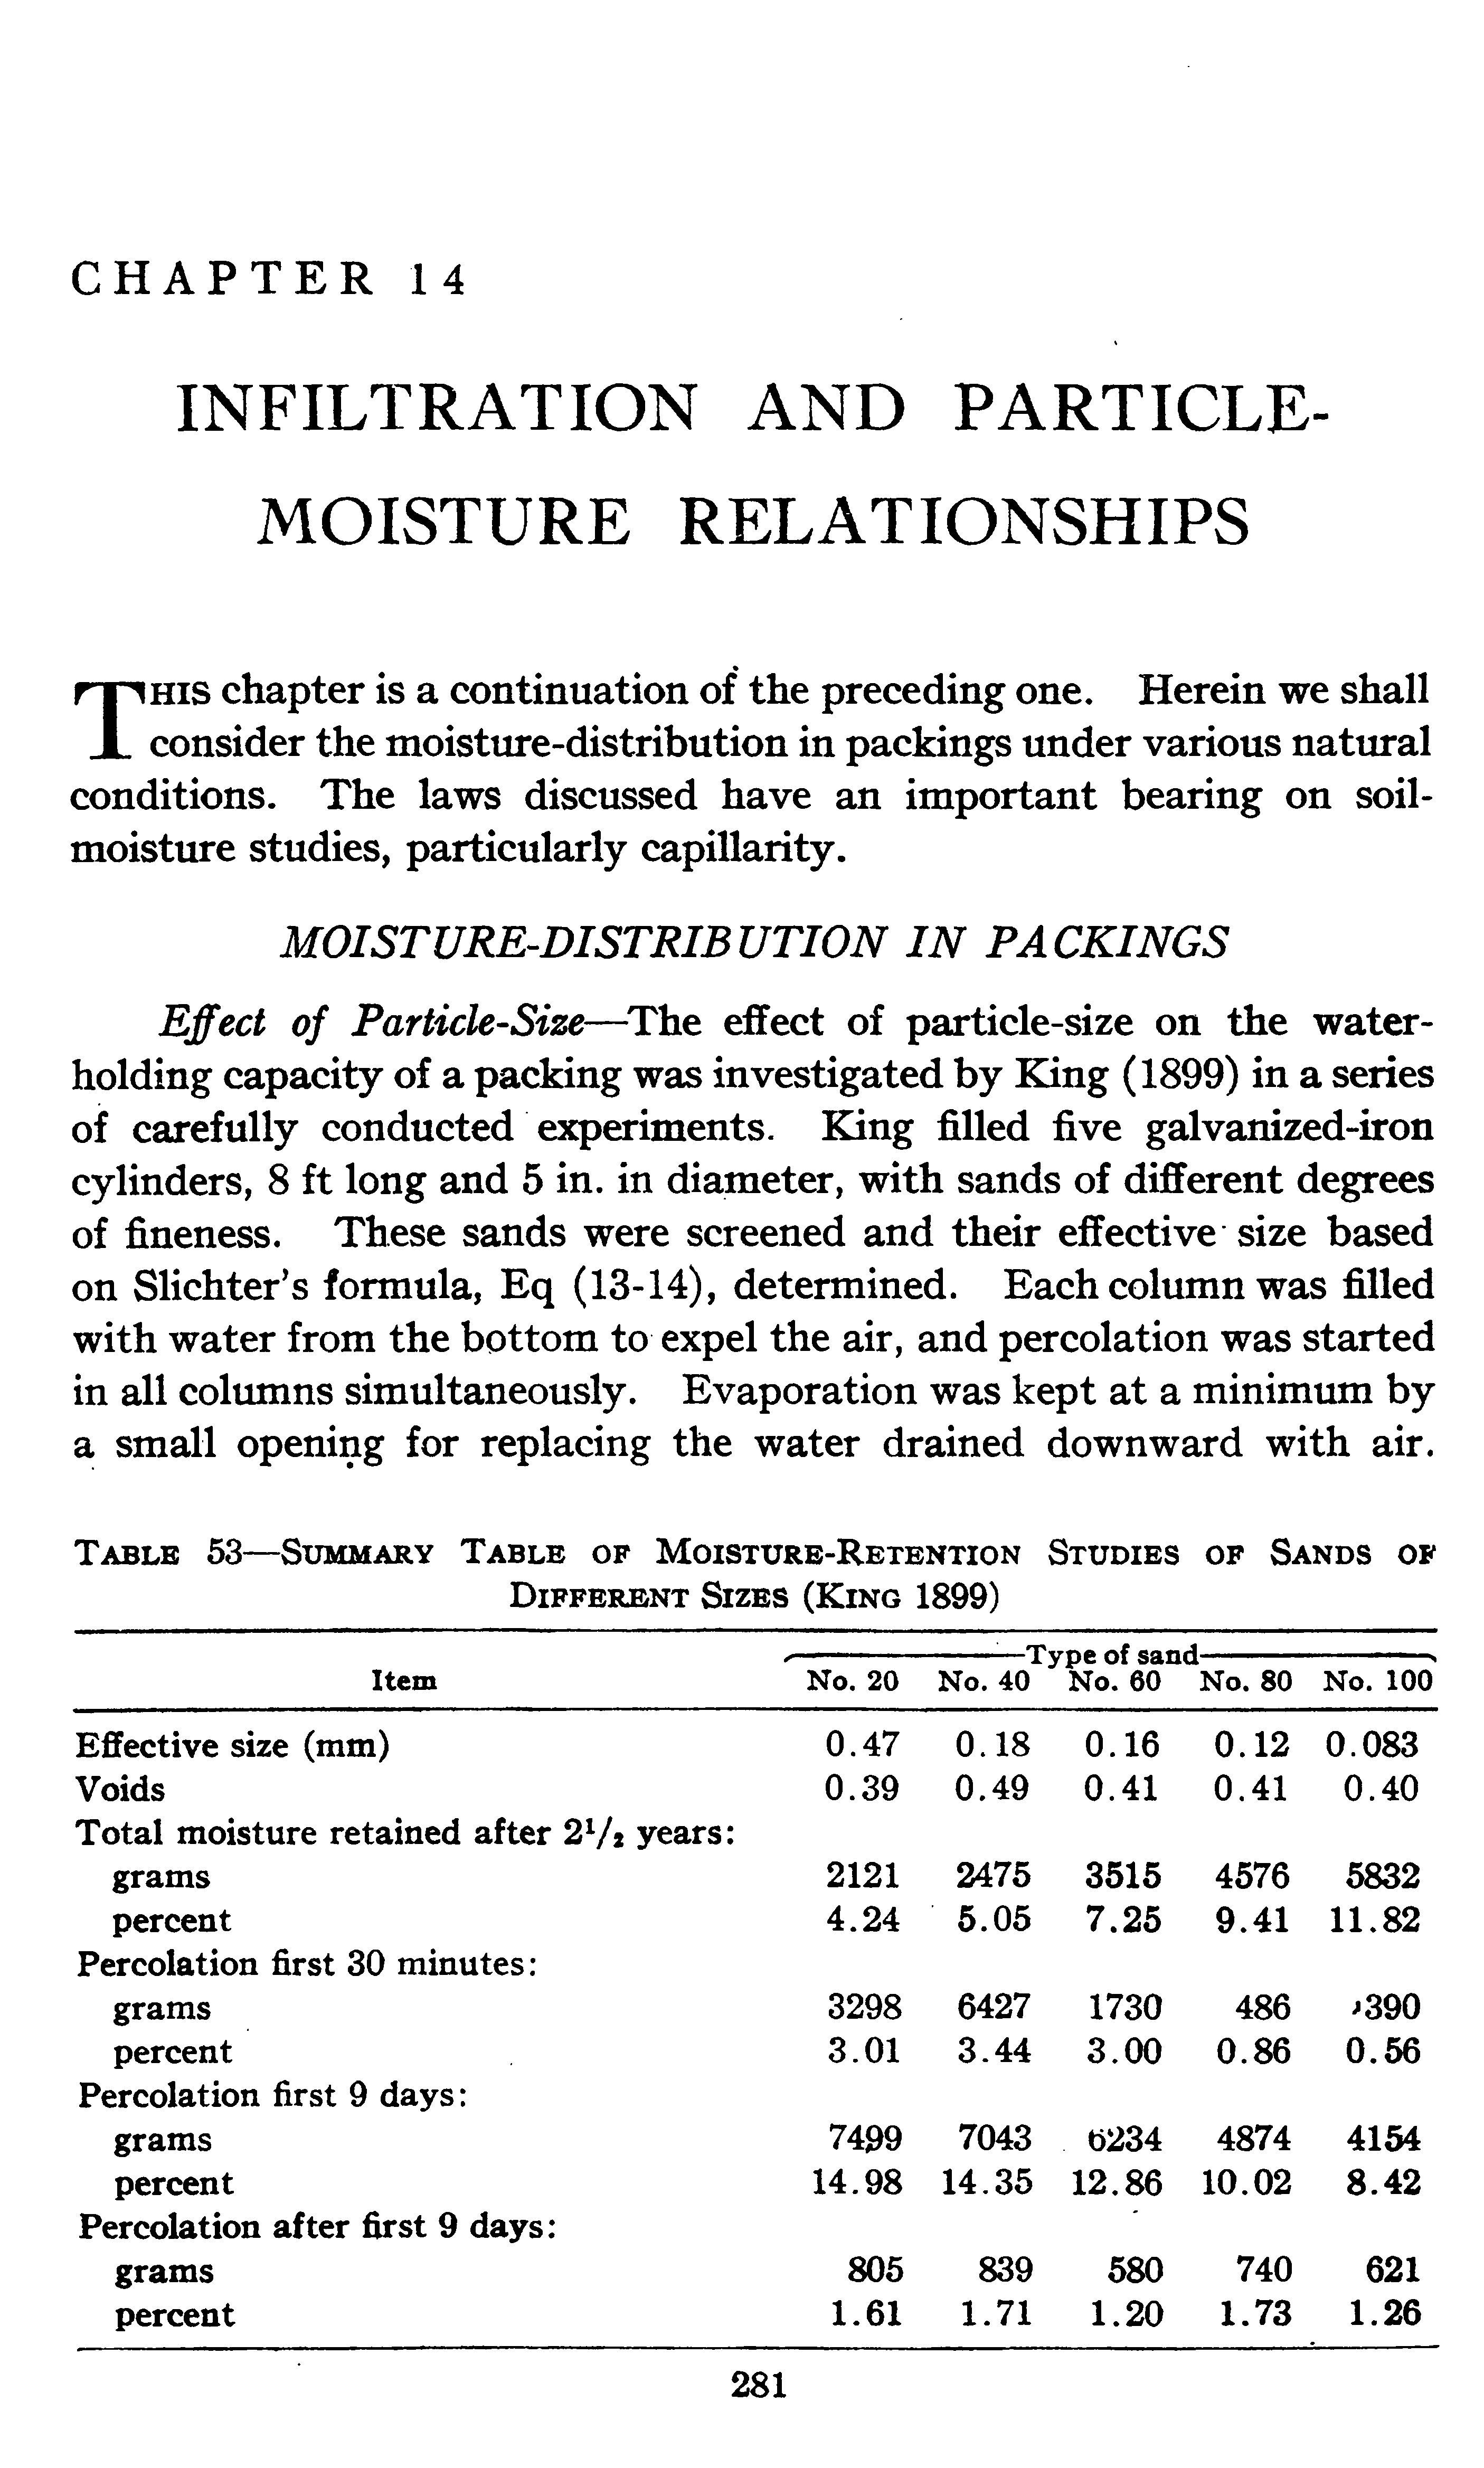 Table 53—Summary Table of Moisture-Retention Studies of Sands of Different Sizes (King 1899)...